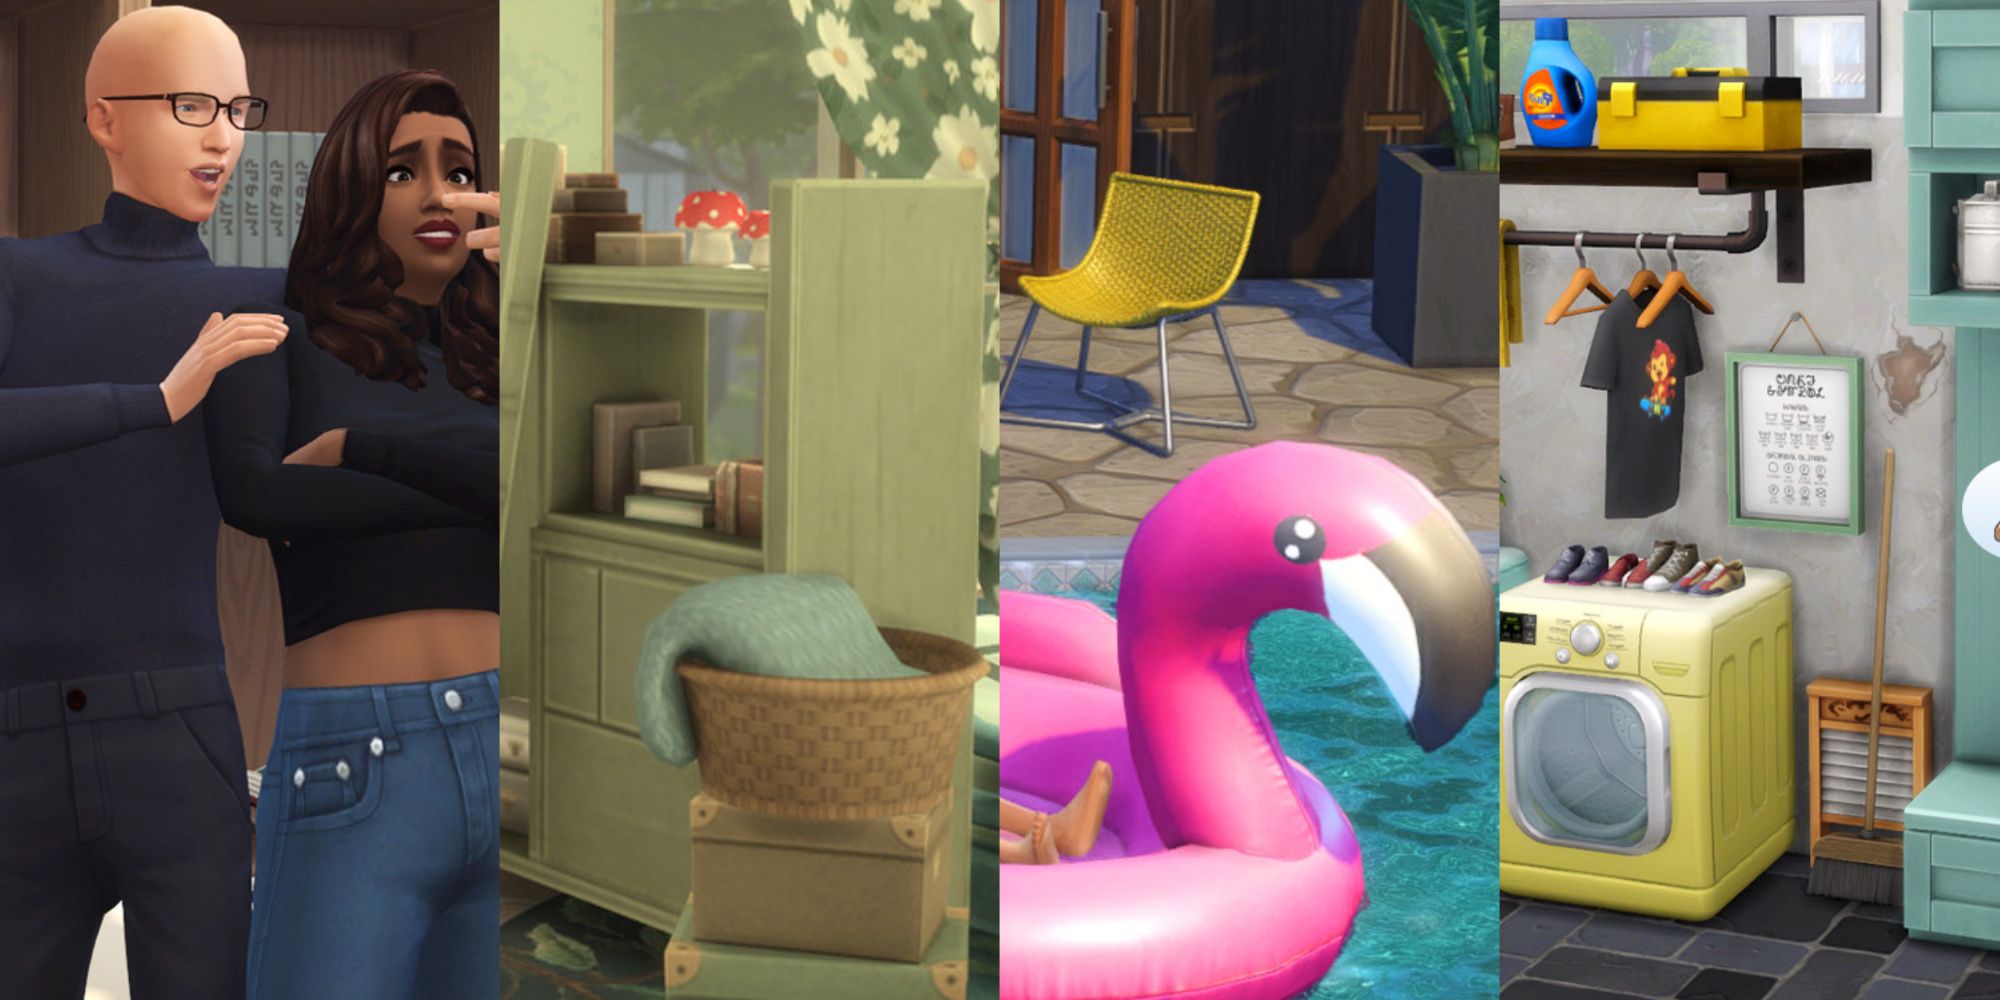 Collage showing a variety of different custom content for The Sims 4 available on Curseforge